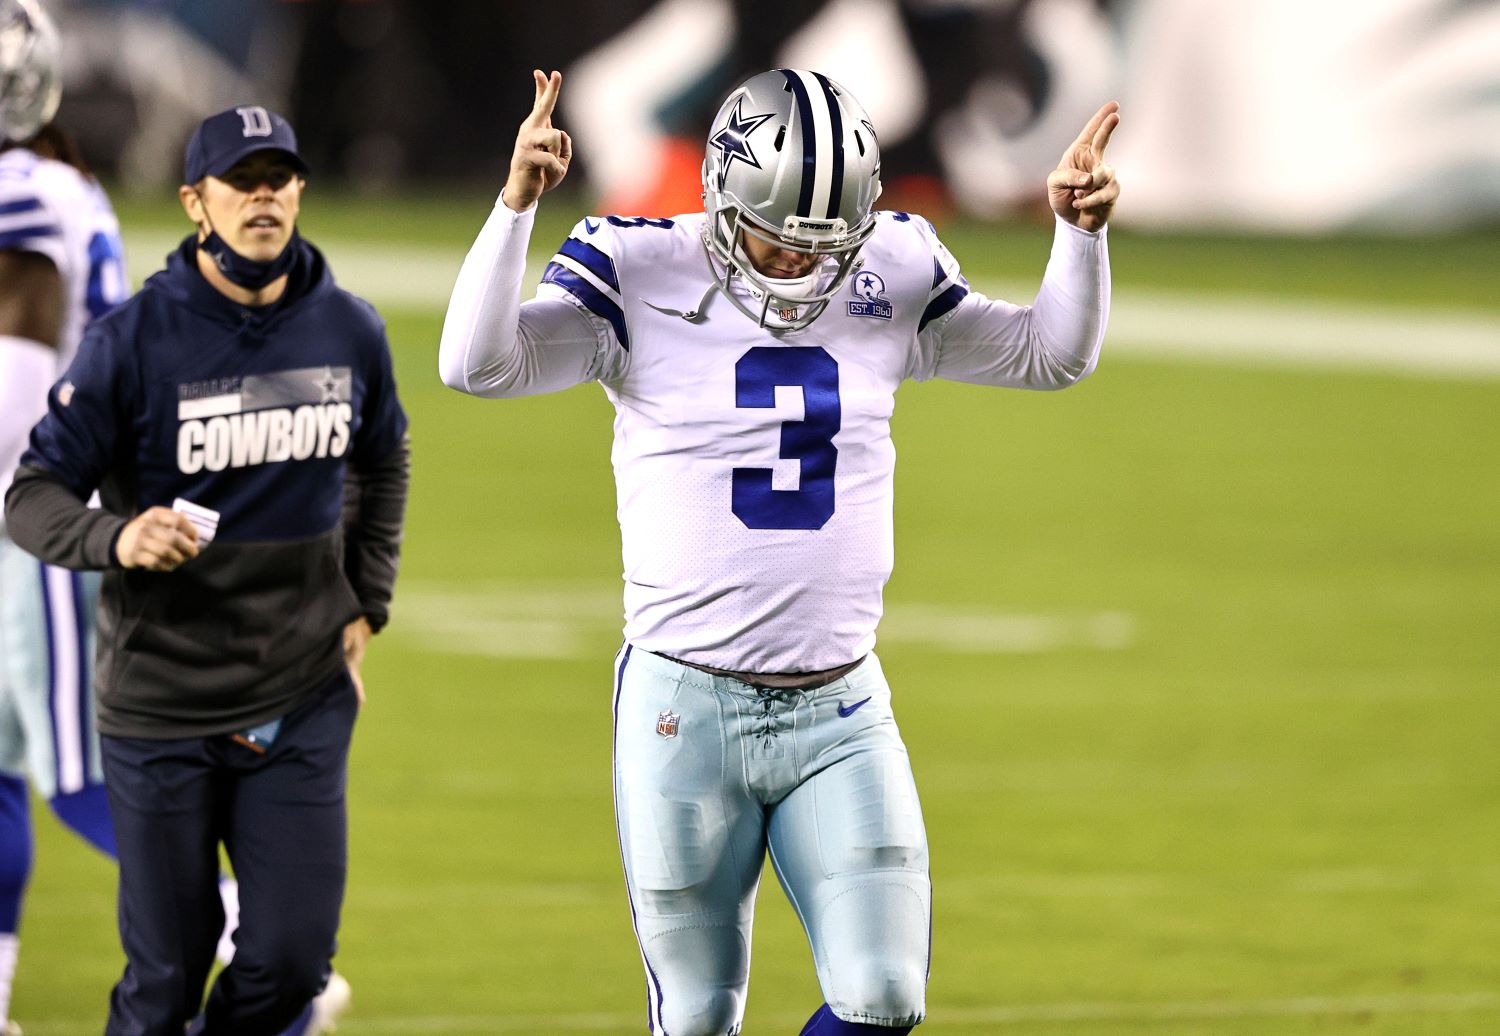 The Dallas Cowboys have named Garrett Gilbert as their starting quarterback for Sunday's matchup against the Pittsburgh Steelers.